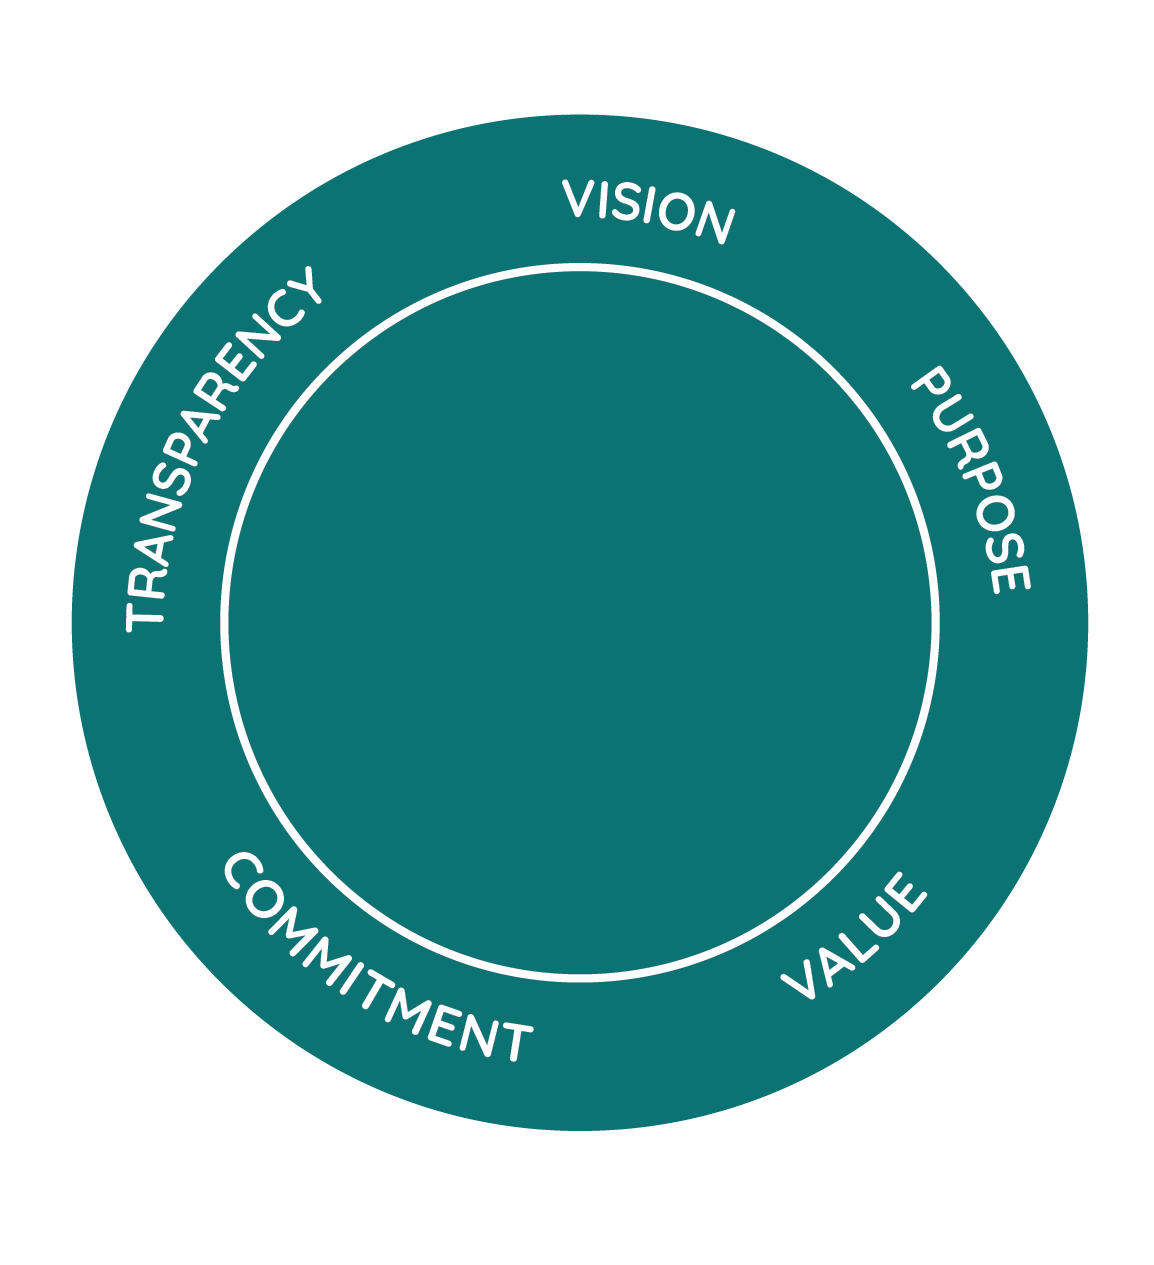 Vision, Transparency, Commitment, Value, Purpose